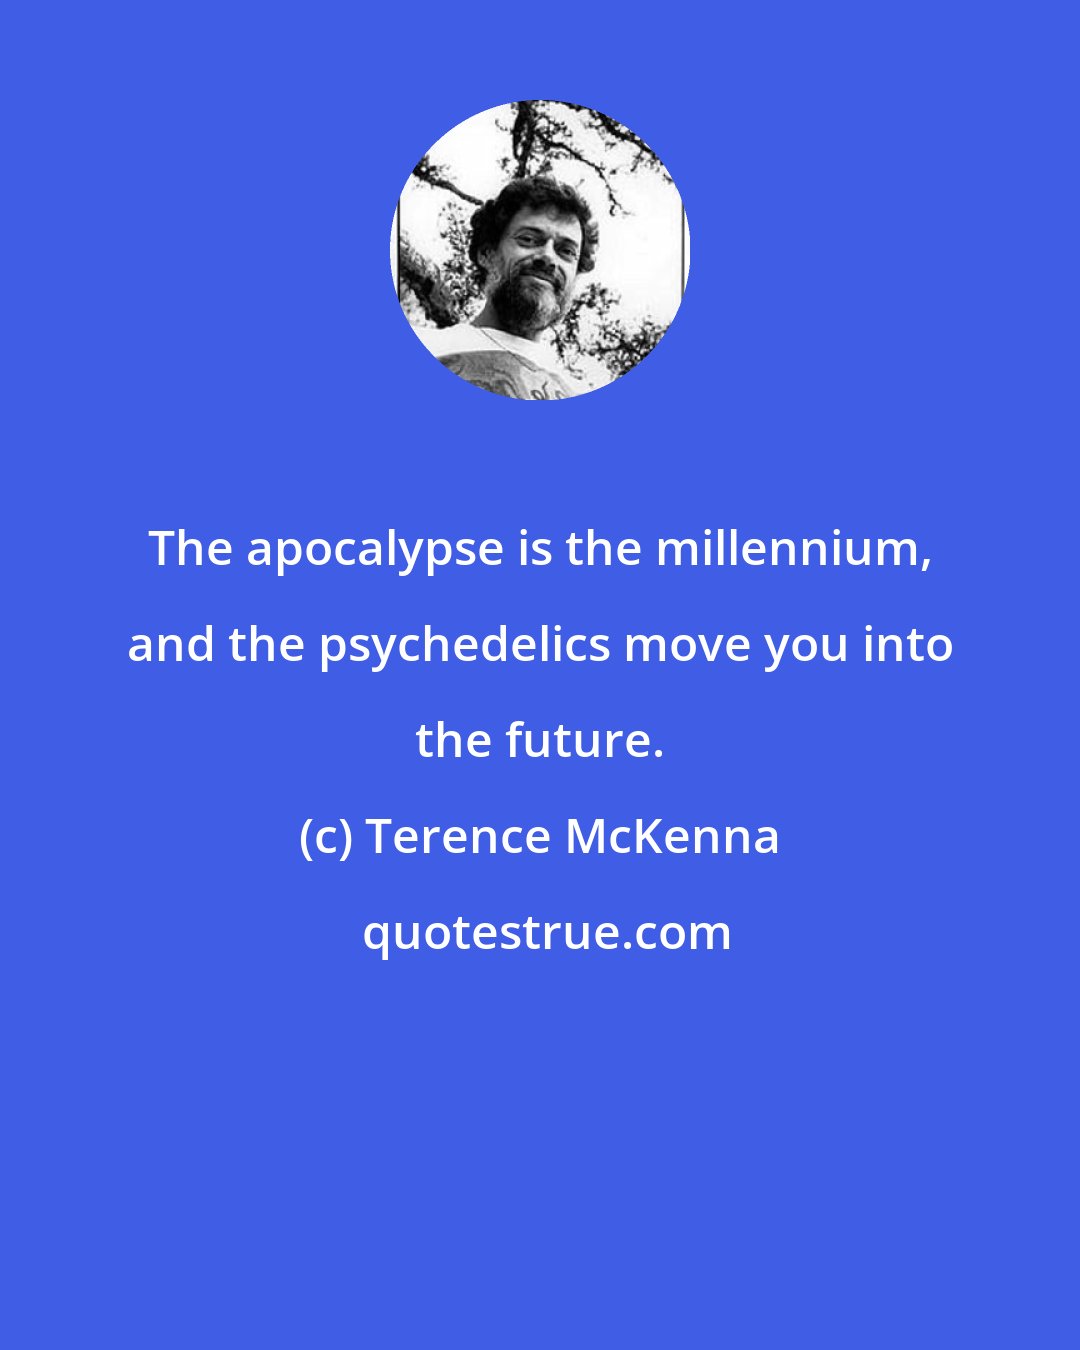 Terence McKenna: The apocalypse is the millennium, and the psychedelics move you into the future.